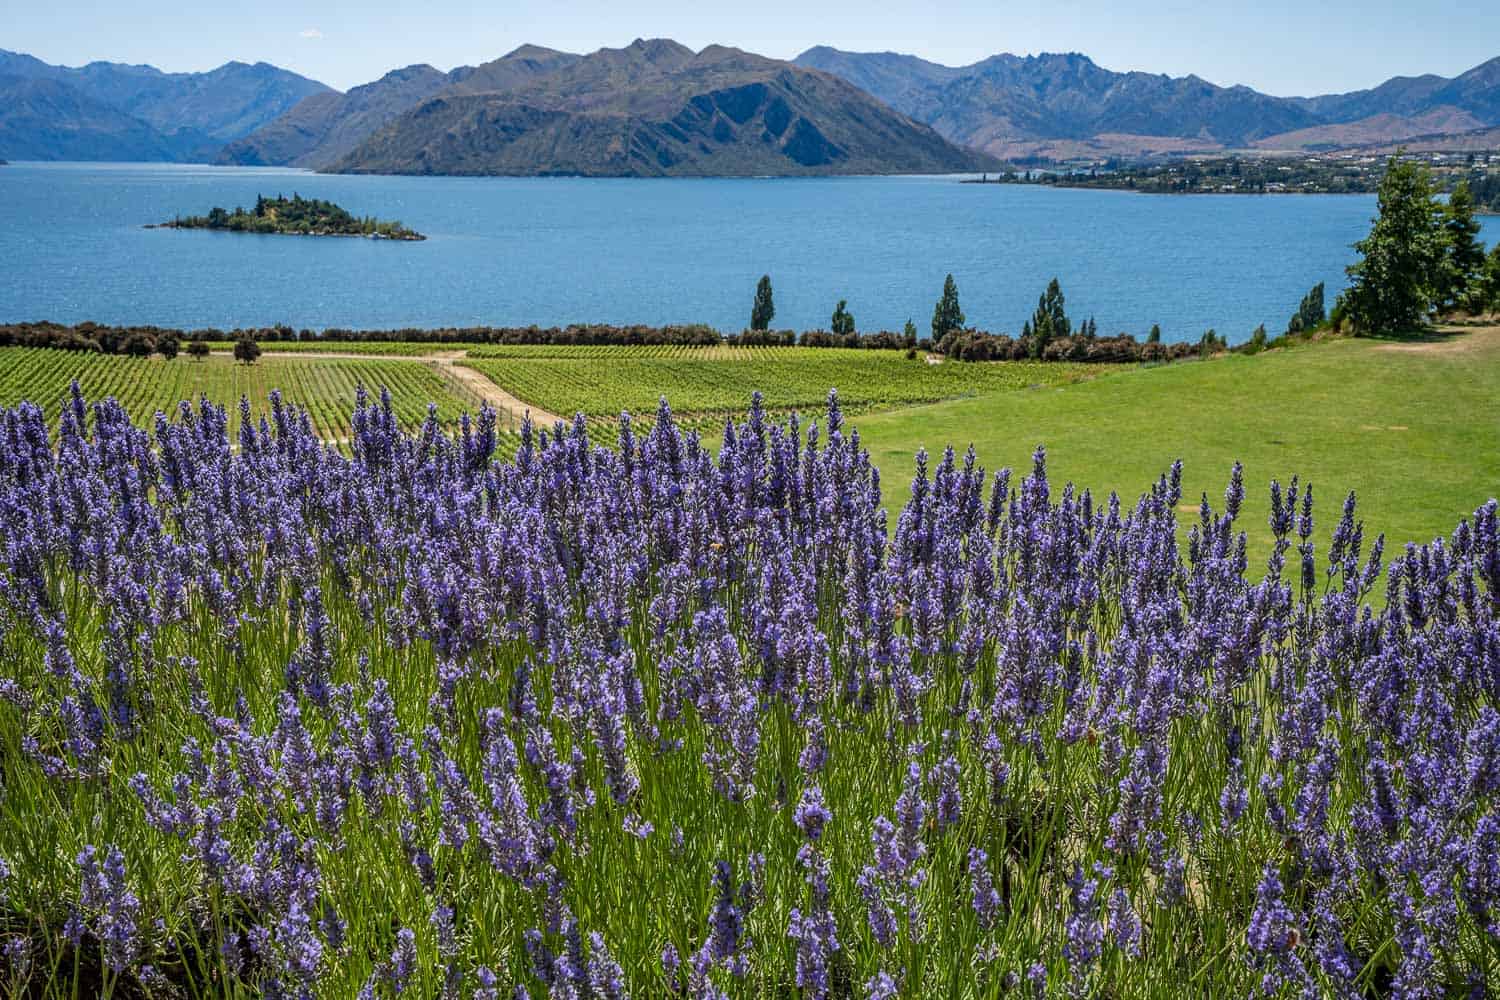 The view from Rippon Winery of lavender, vines and Lake Wanaka, New Zealand